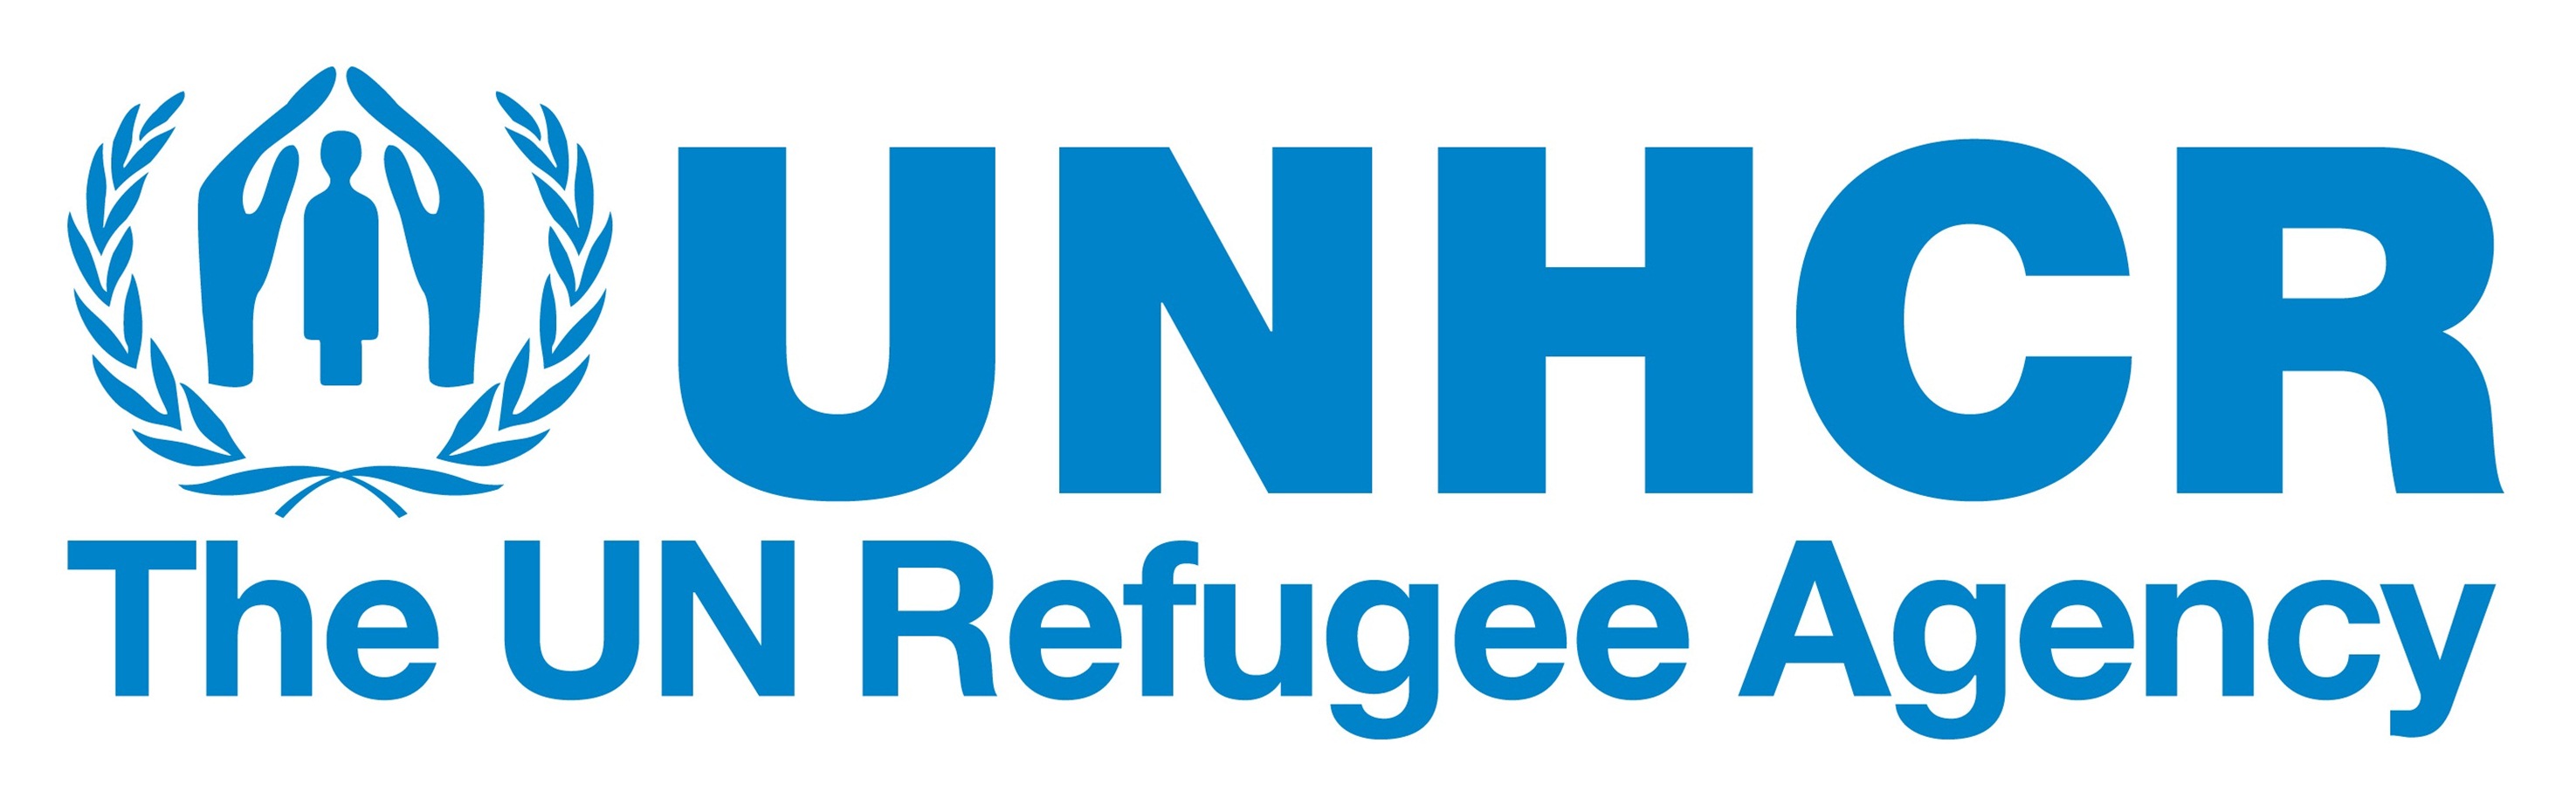 The UN Refugee Agency